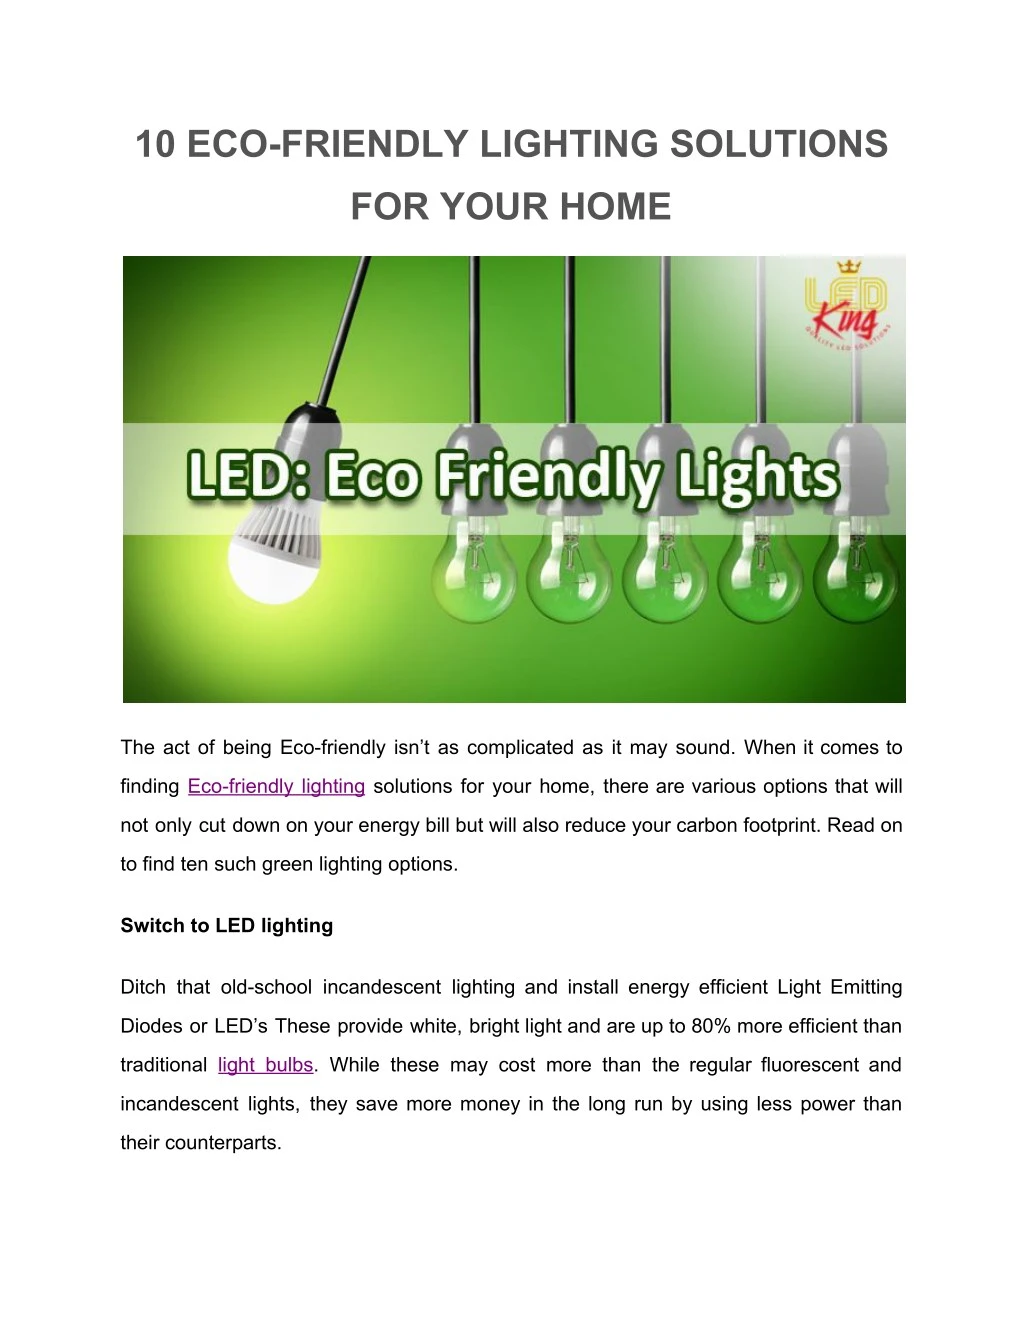 10 eco friendly lighting solutions